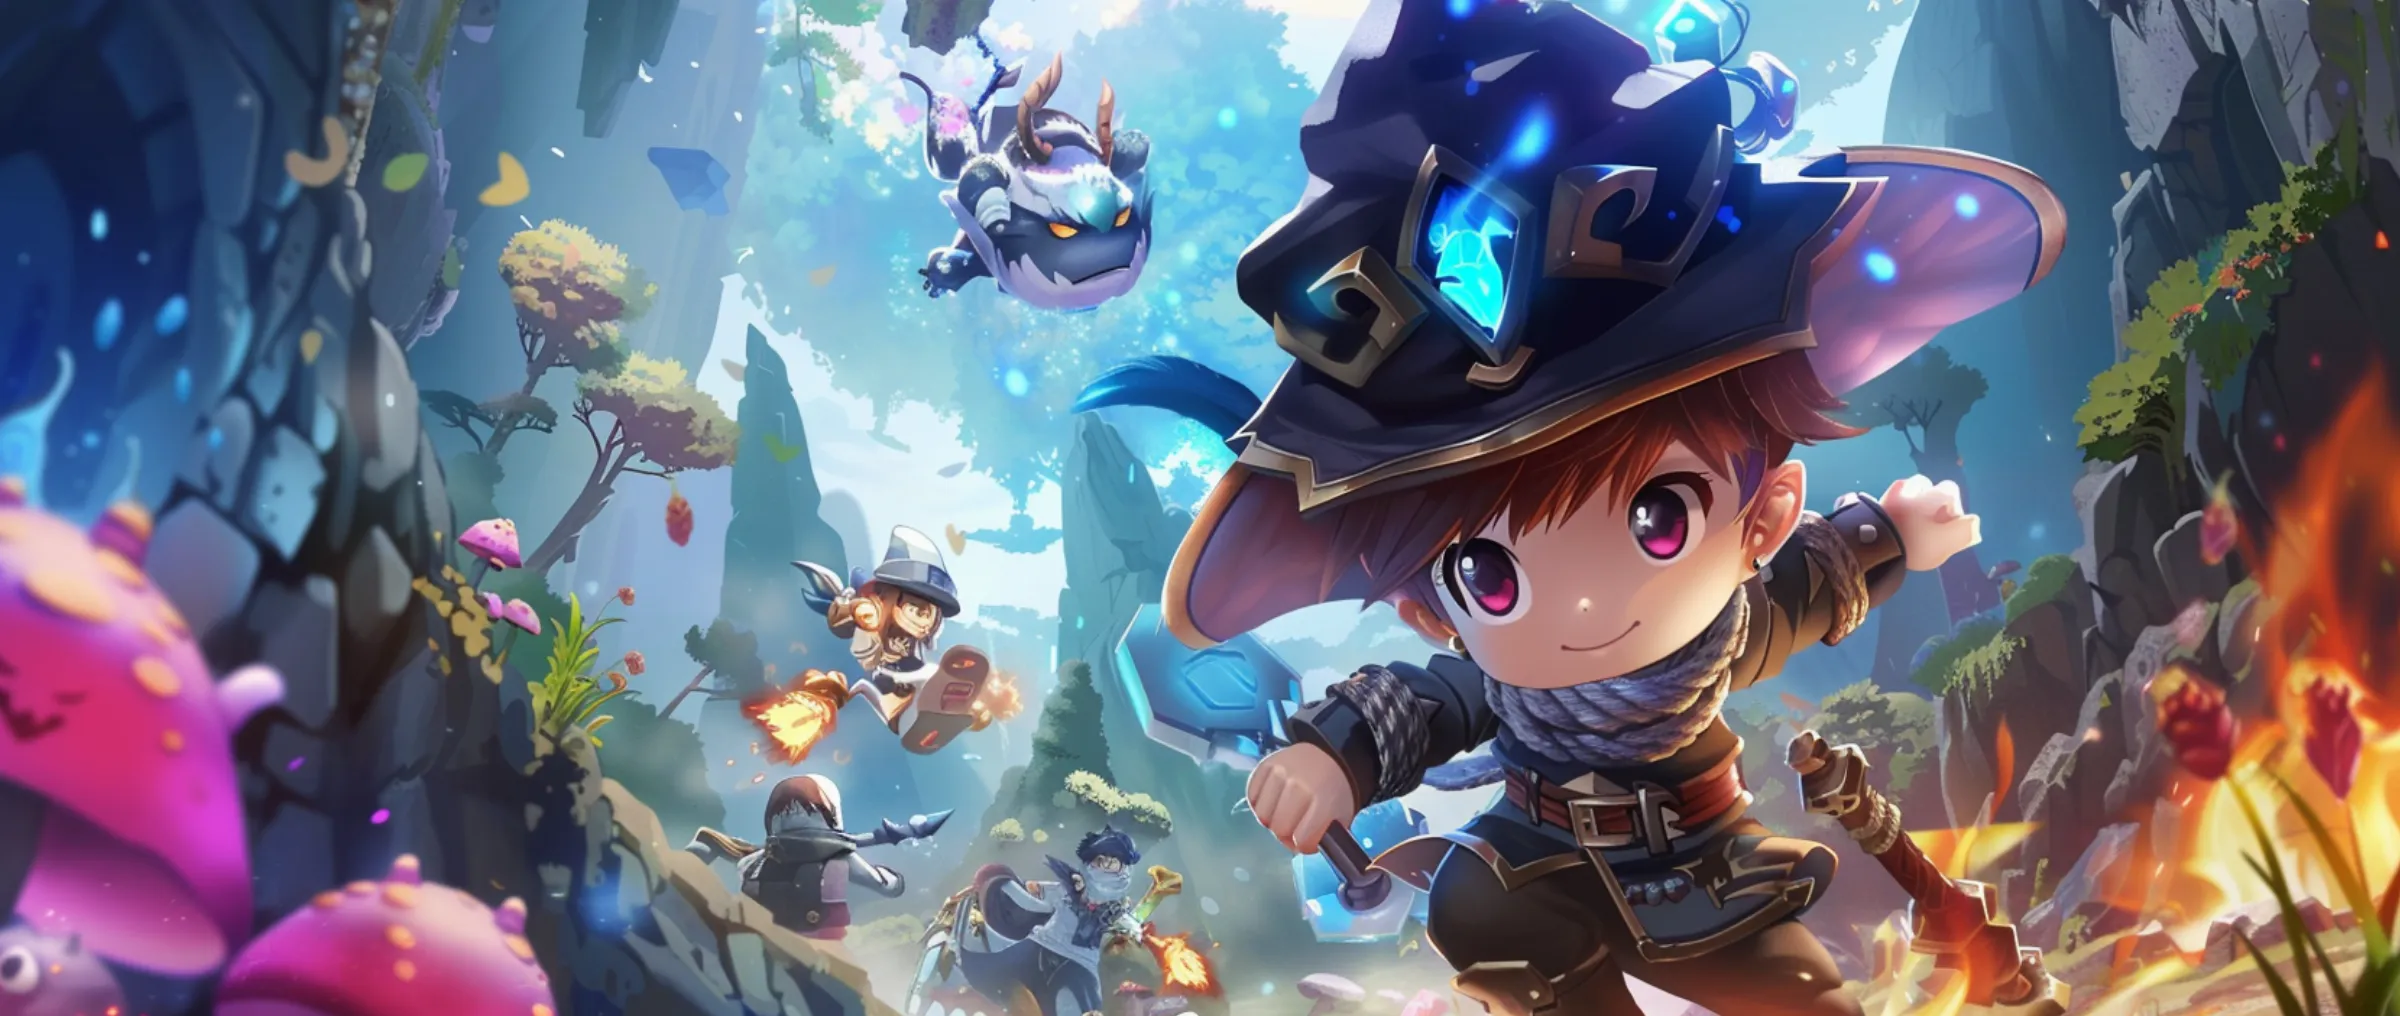 MapleStory selects Avalanche for development in the blockchain gaming area